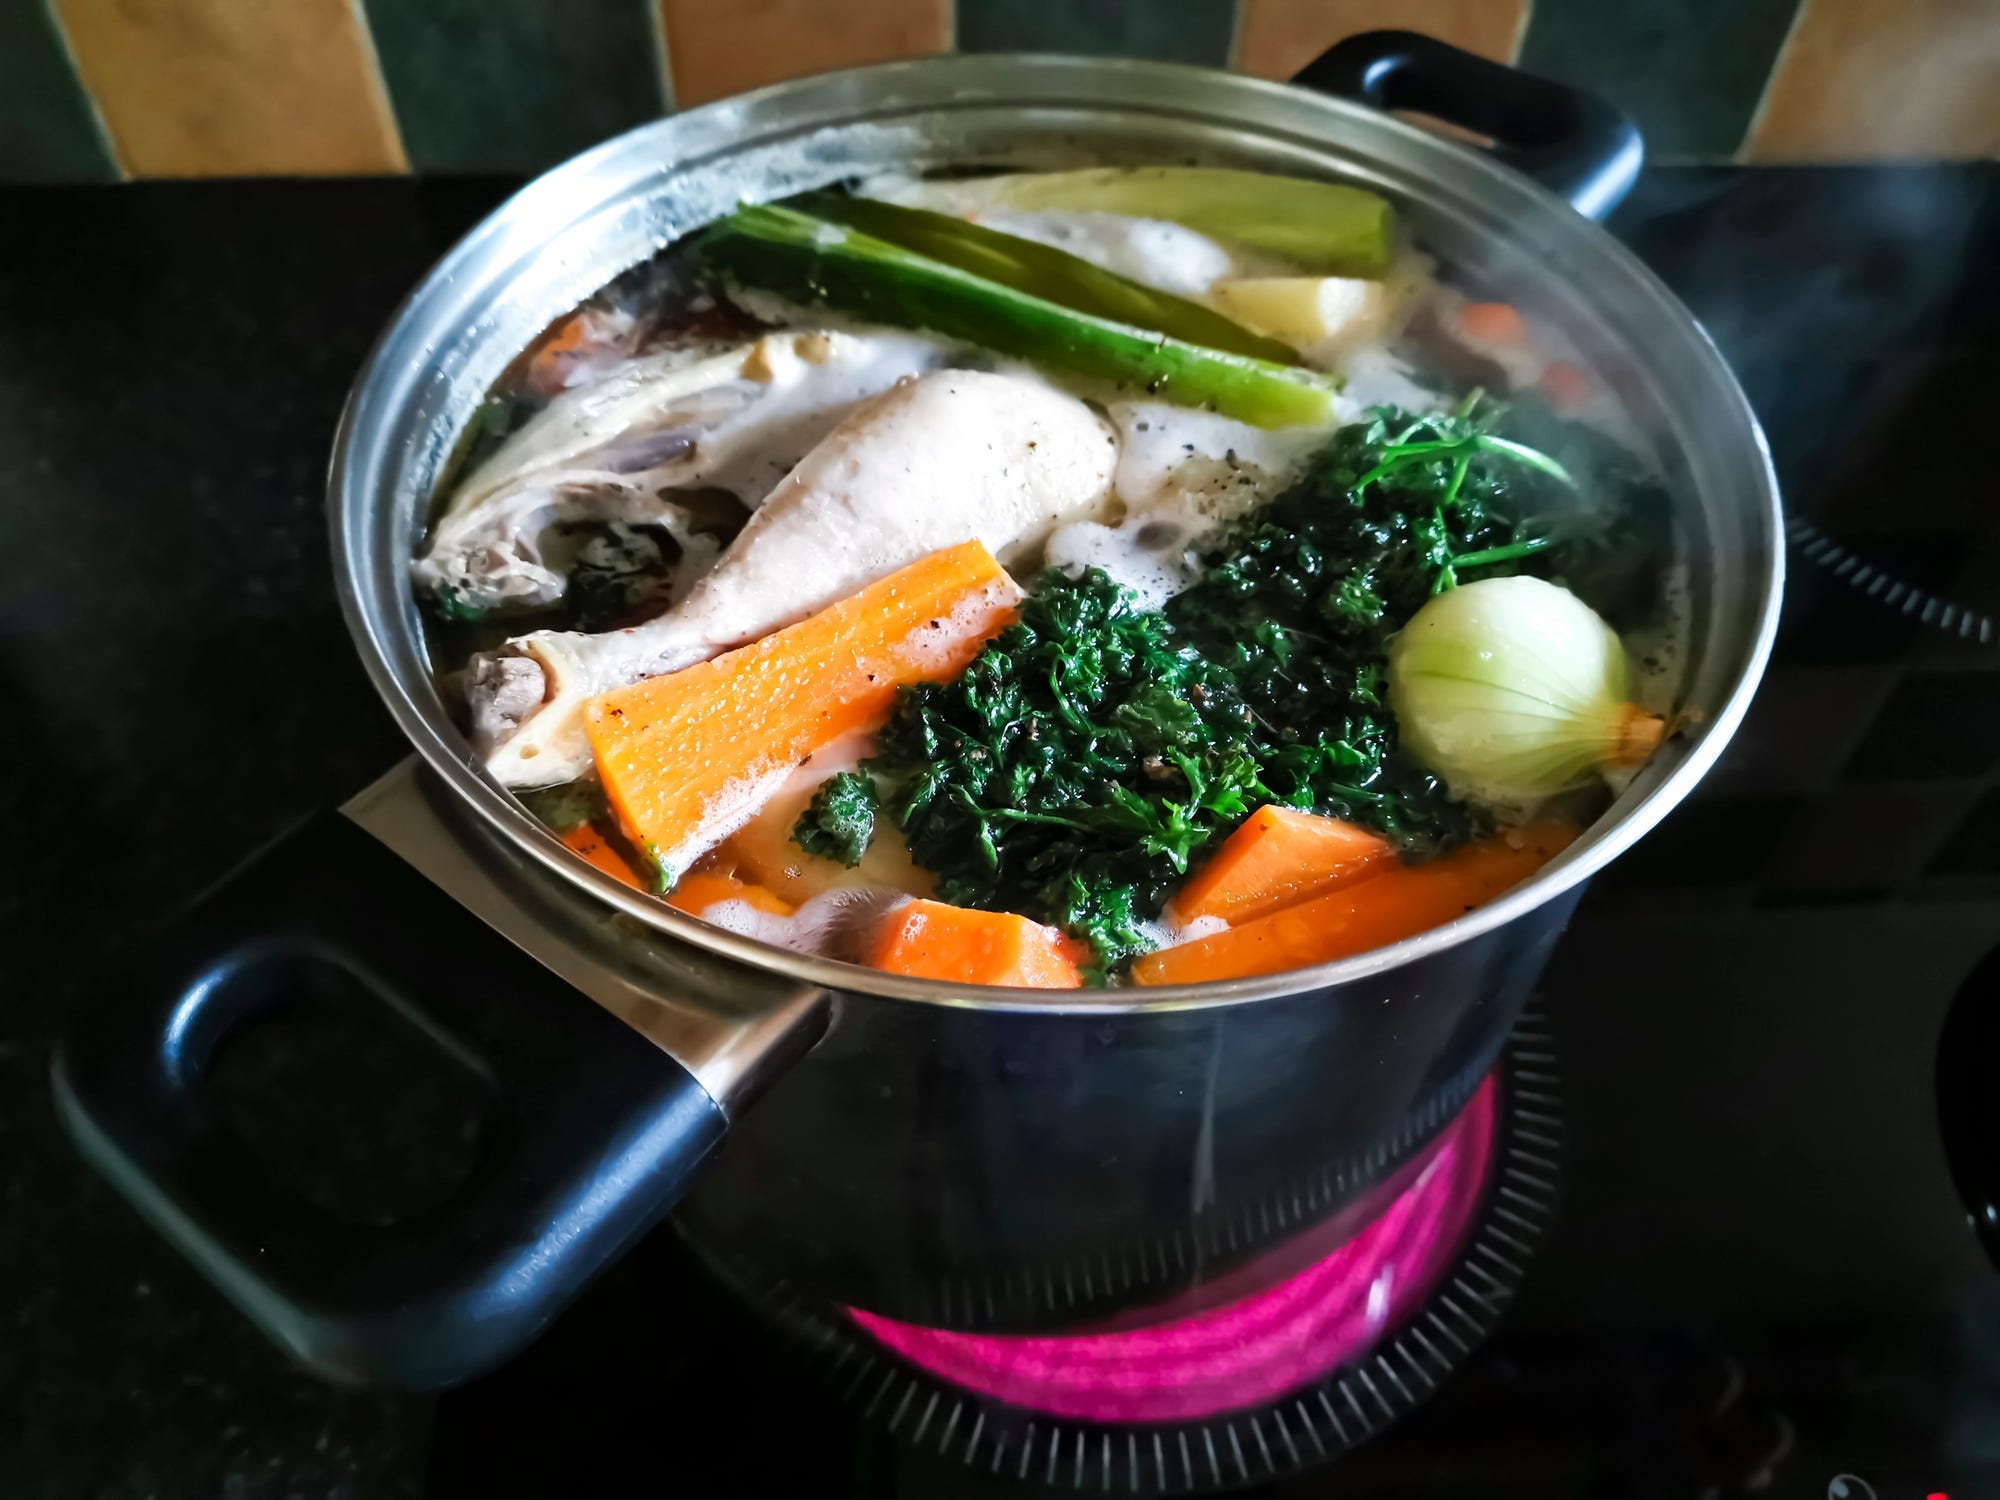 Saucepan of chicken surrounded by vegetables.